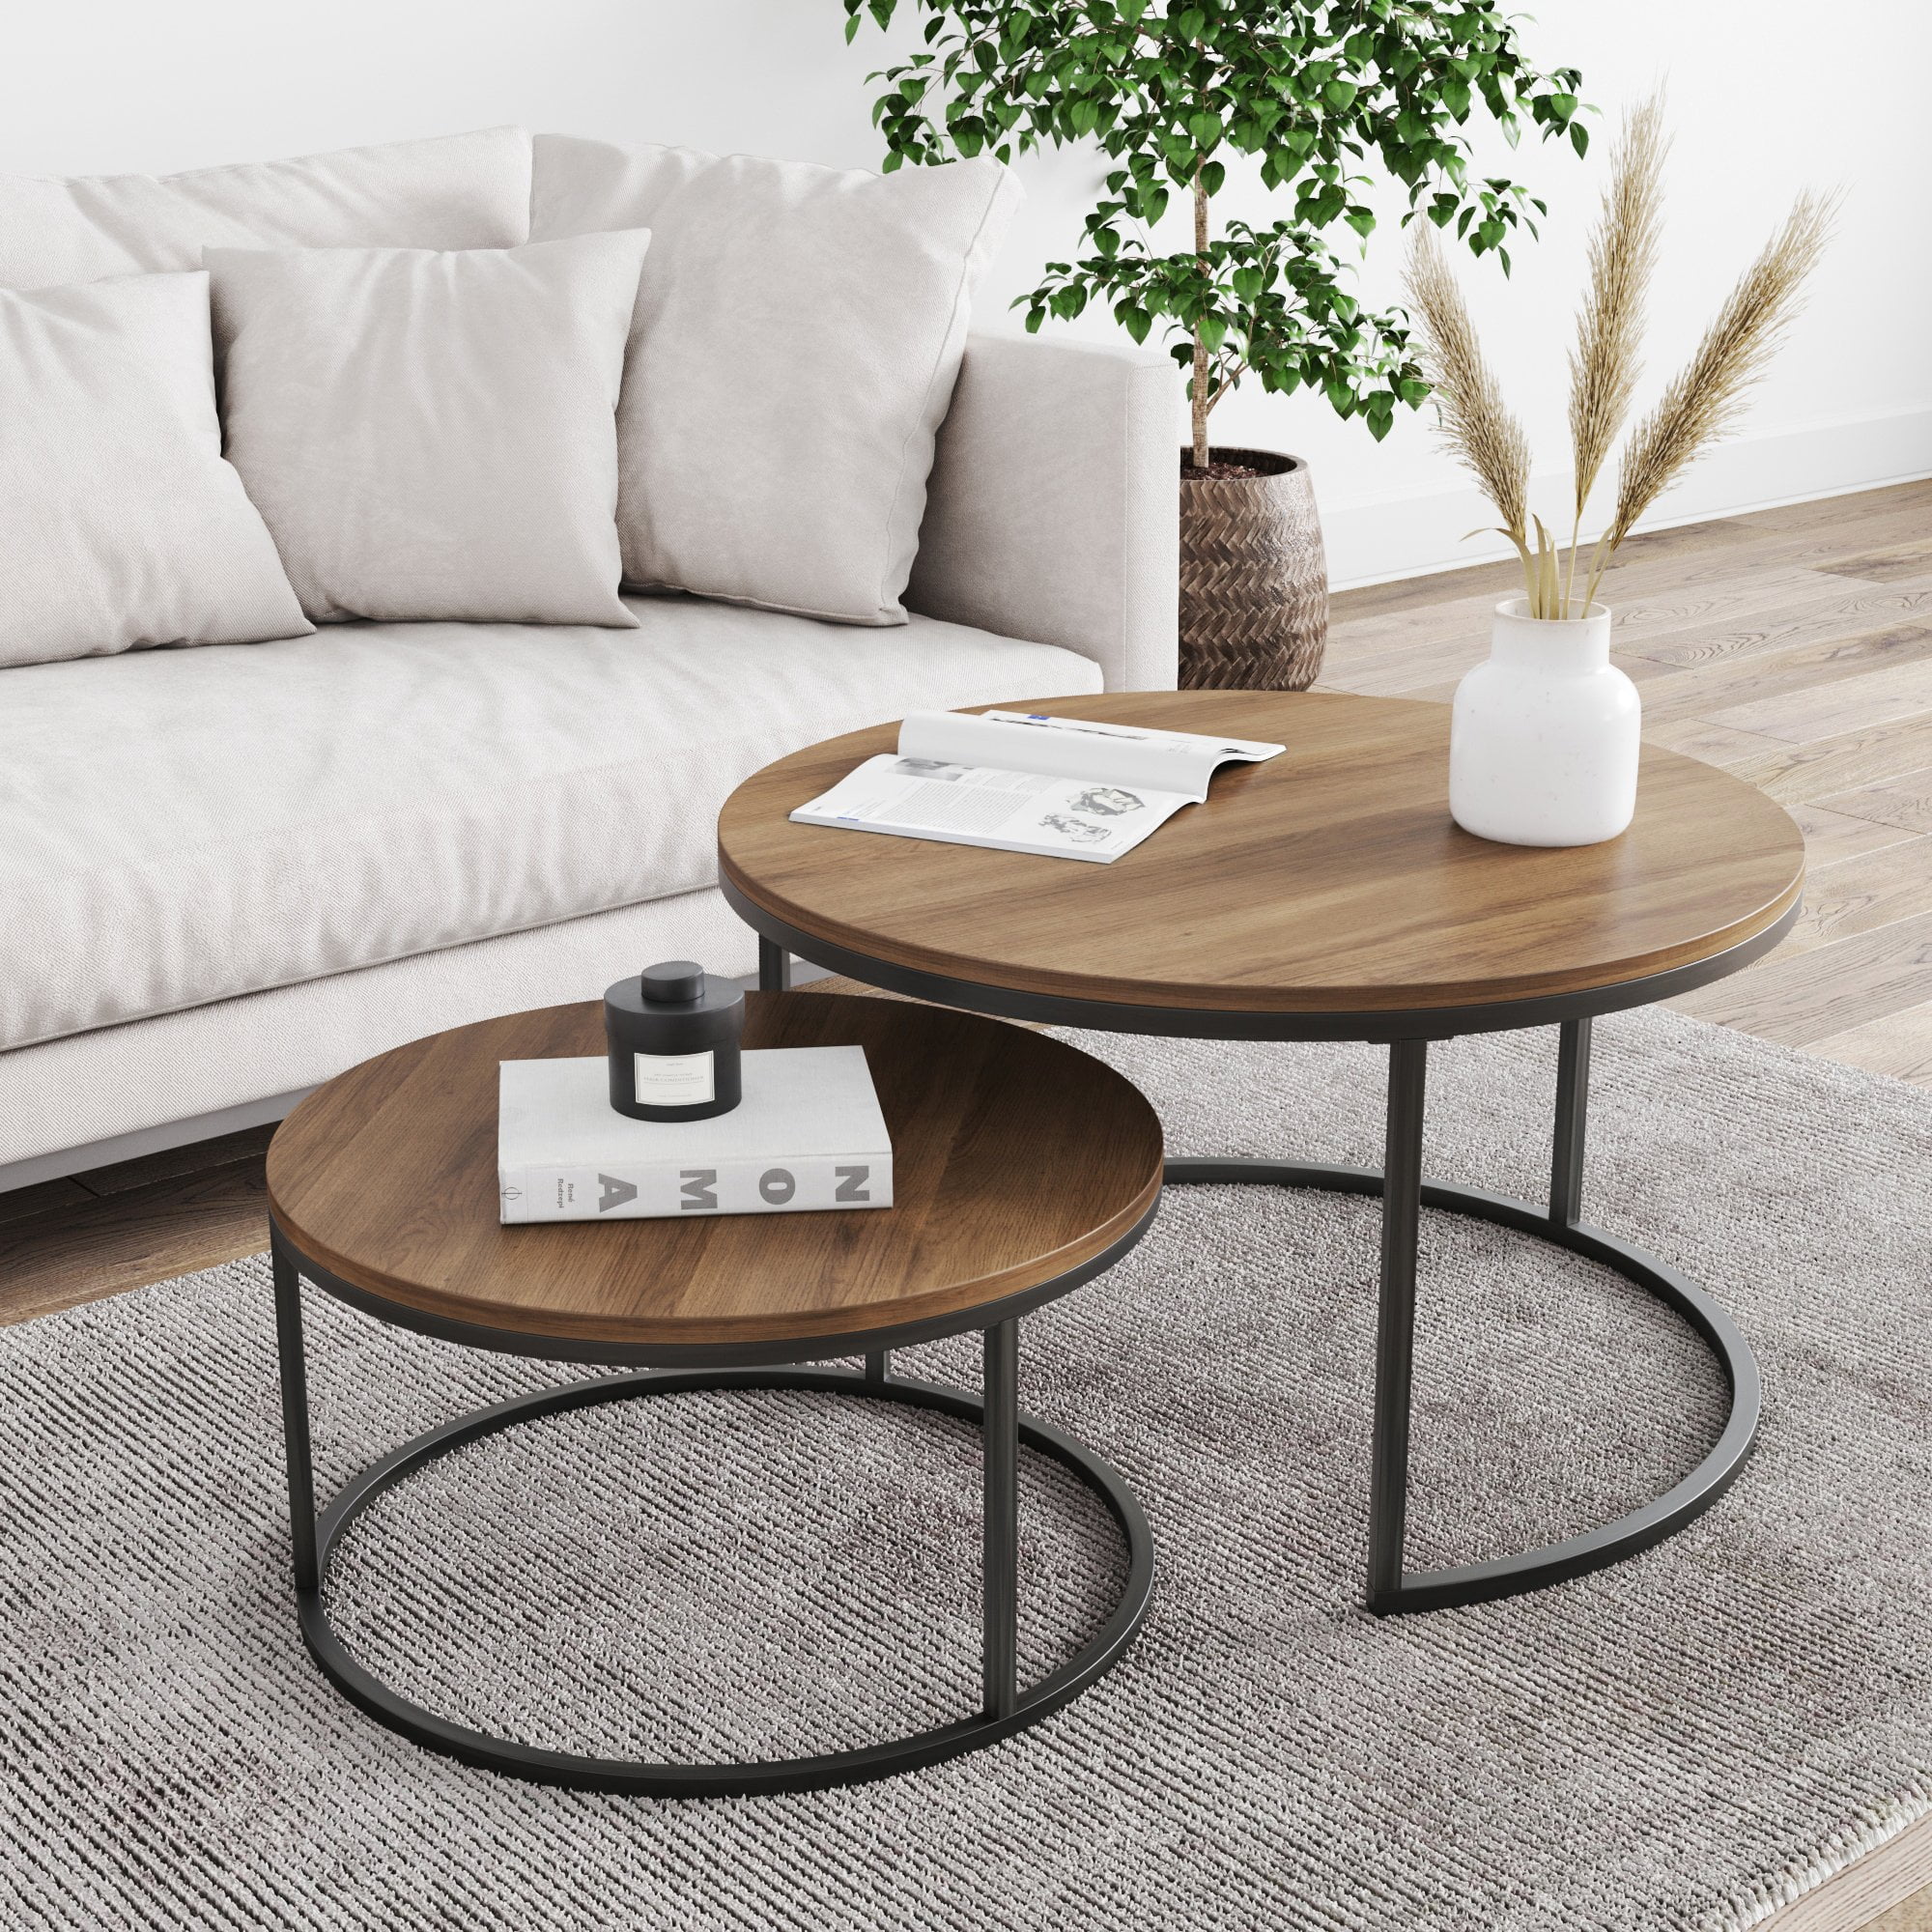 32 and 24 Modern Nesting Round Coffee Table Sets with Golden Color Frame Marble Wood Top for Living Room